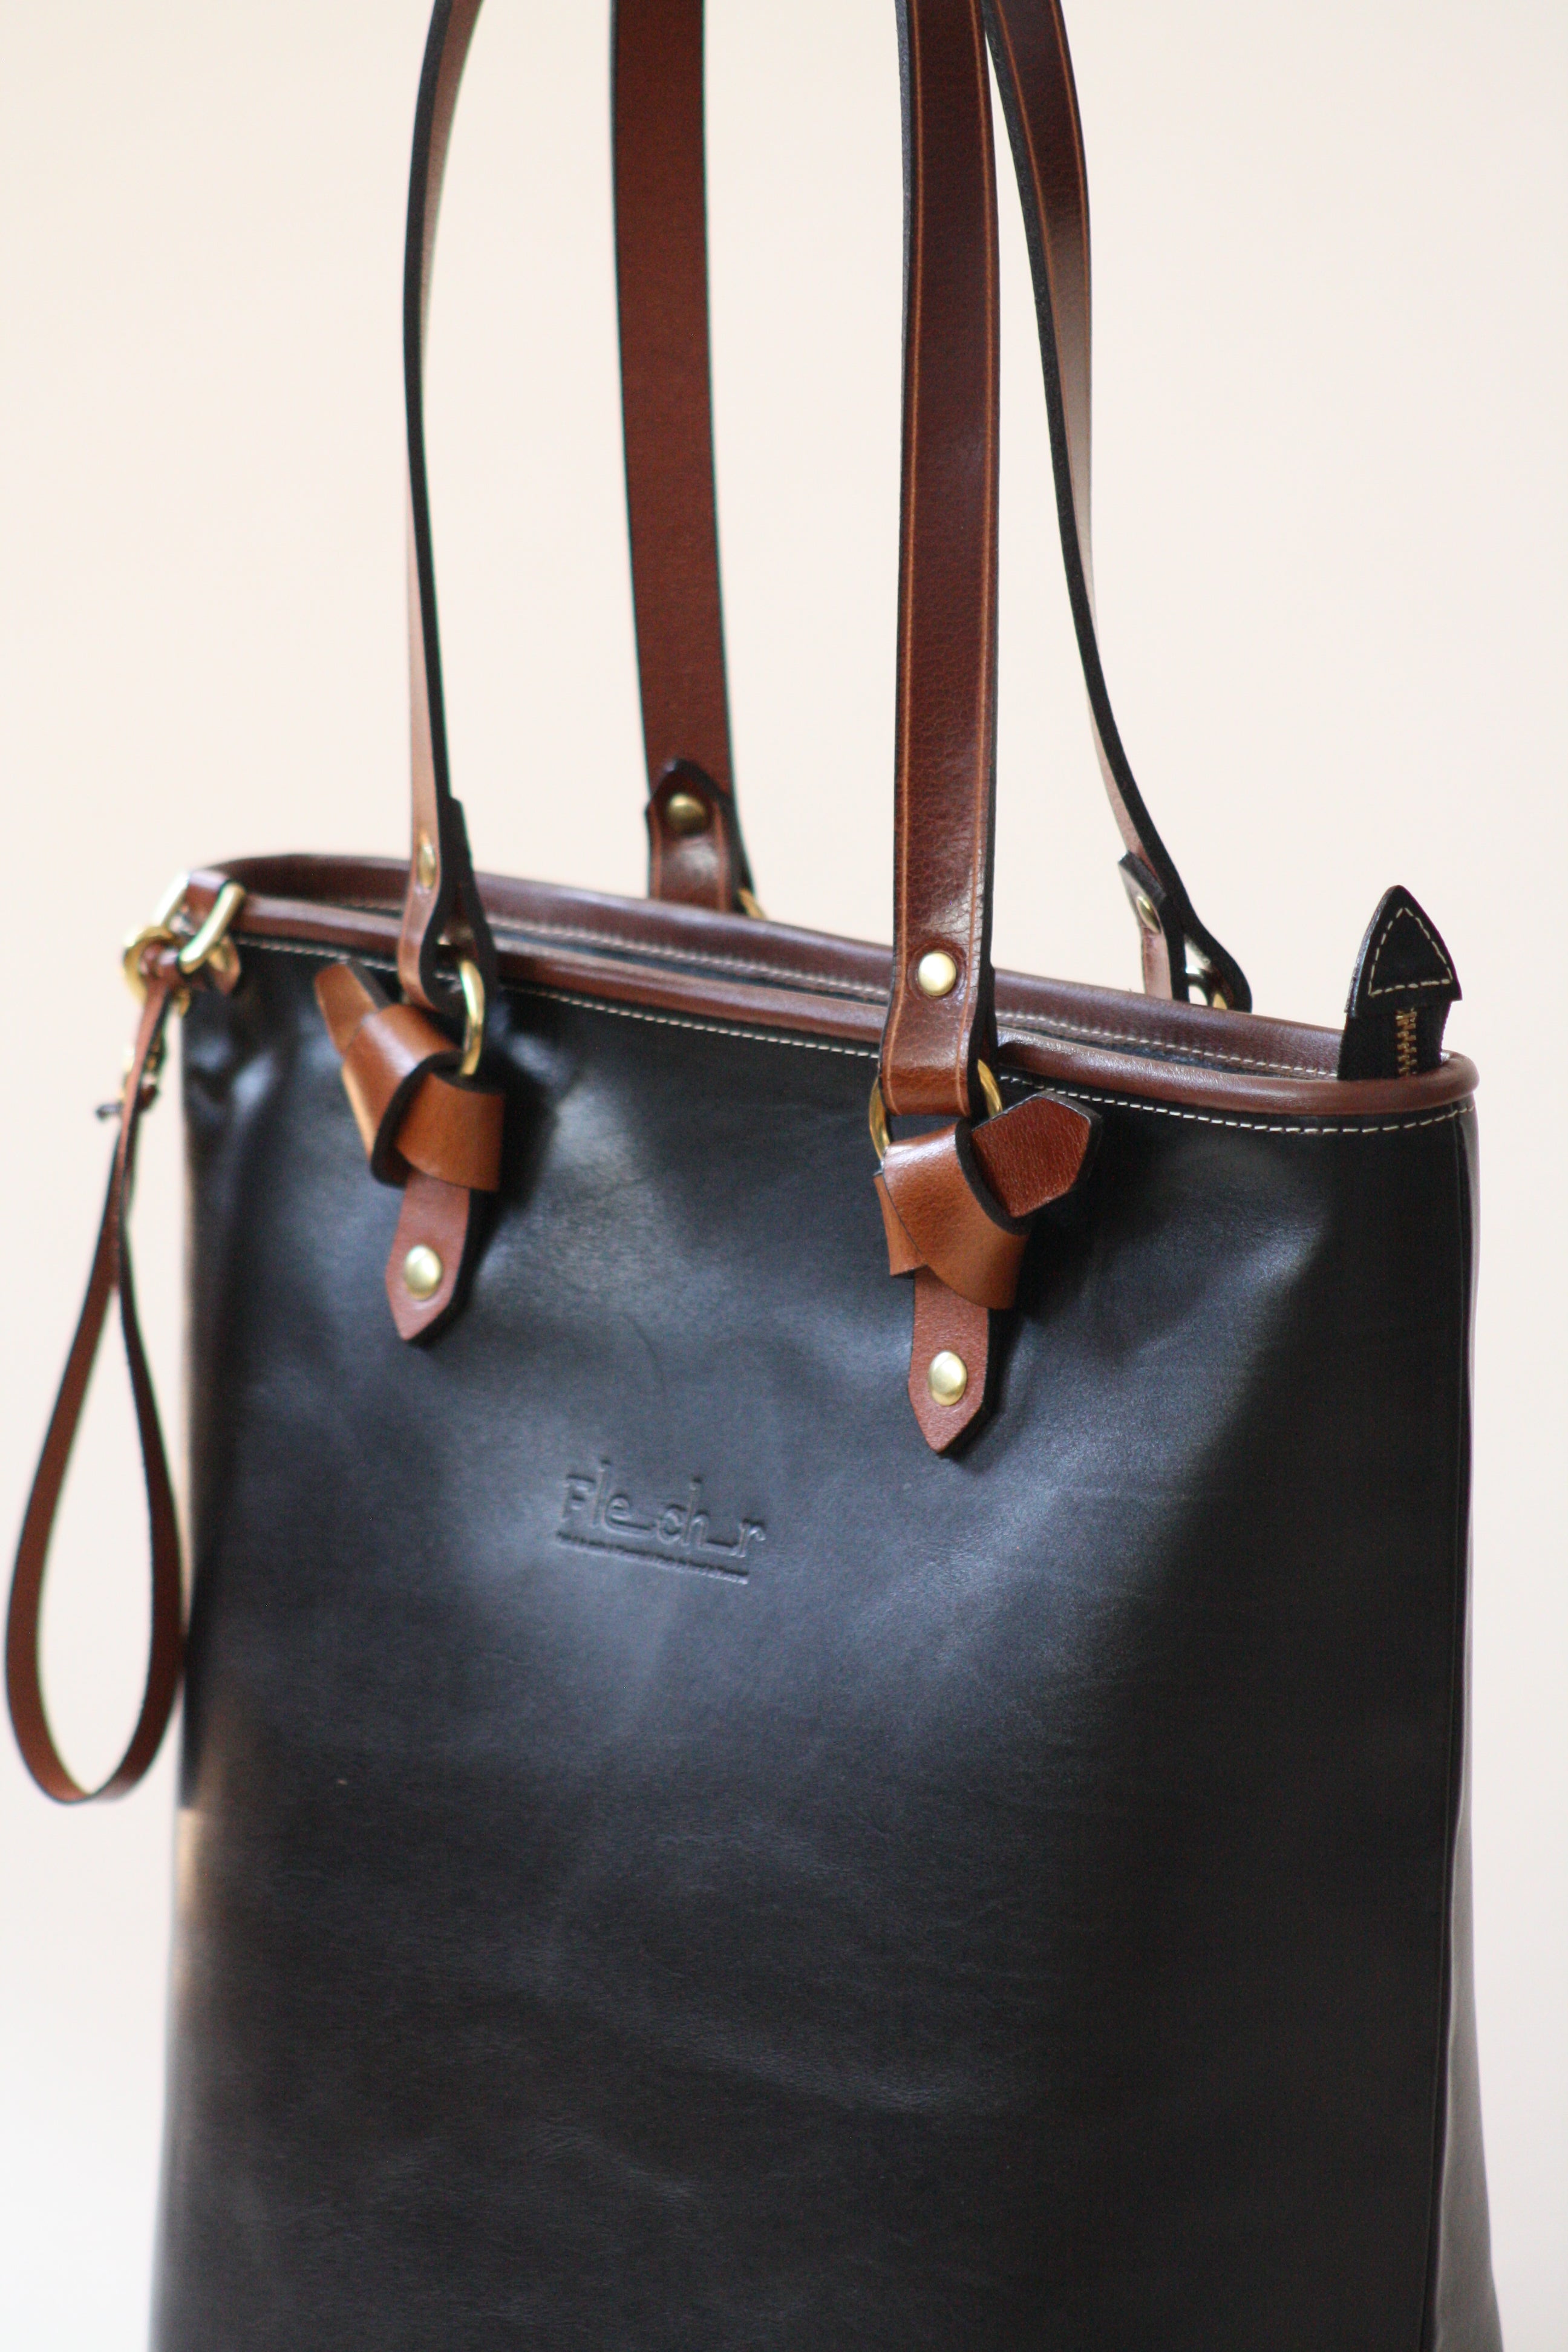 black leather women market tote bag handmade in canada Mtl  by Kimberly Fletcher